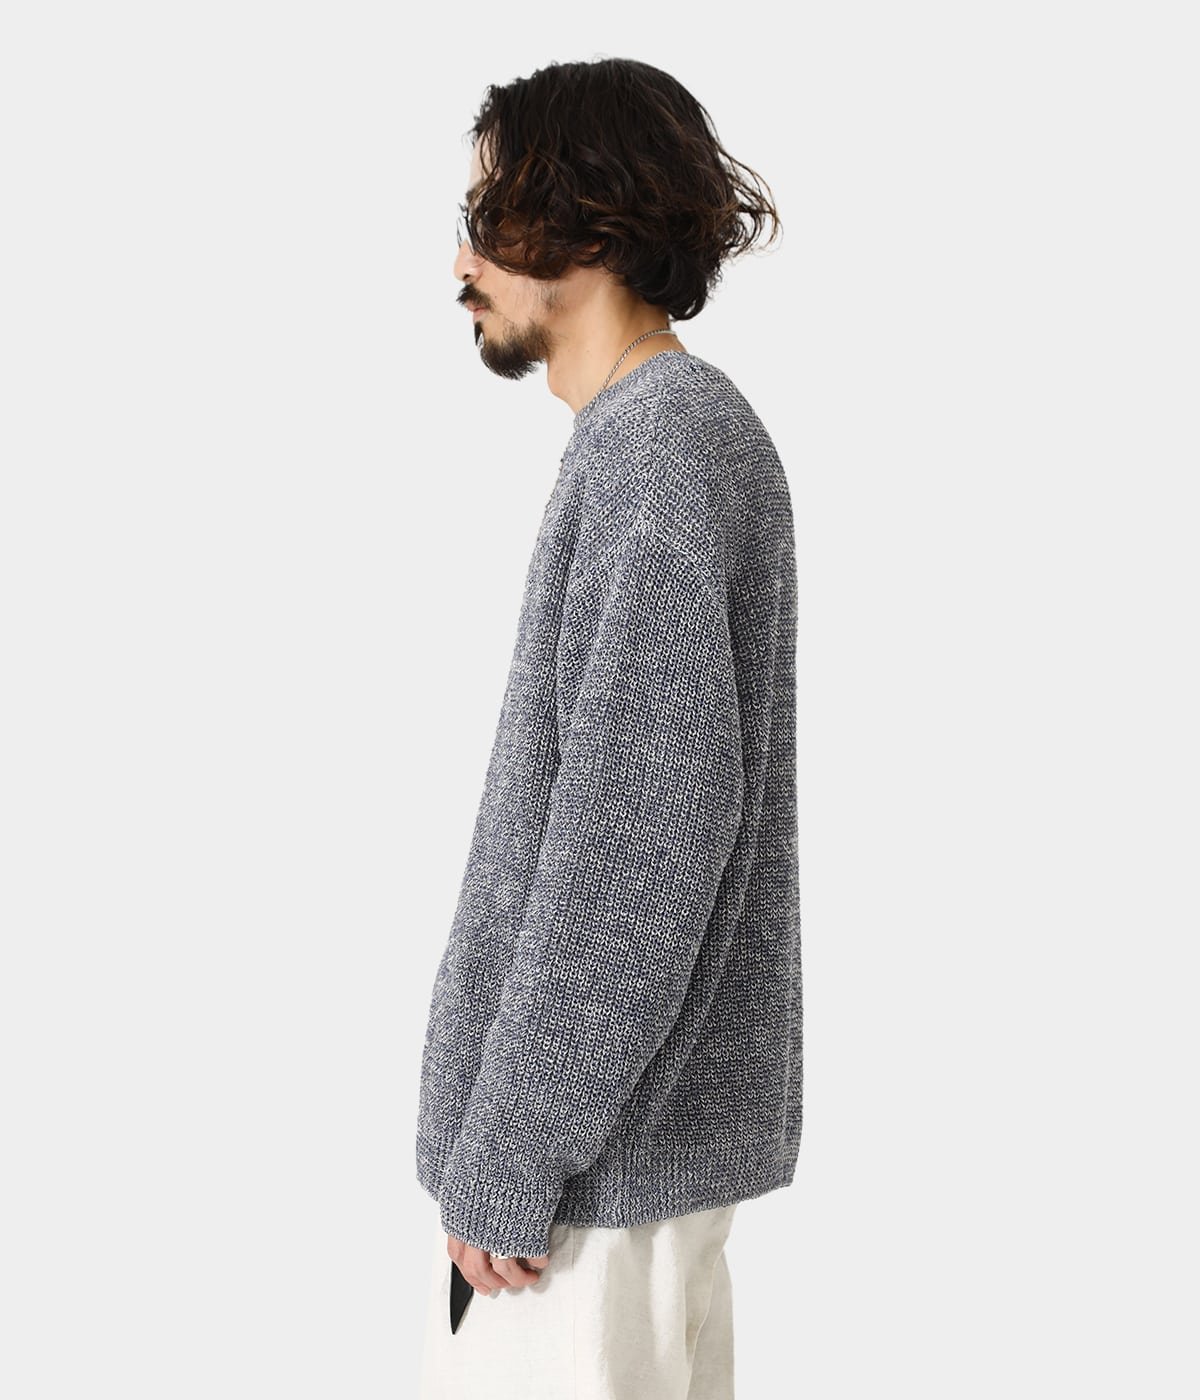 PORT BY ARK(ポートバイアーク) Straw yarn Knit P/O / トップス 